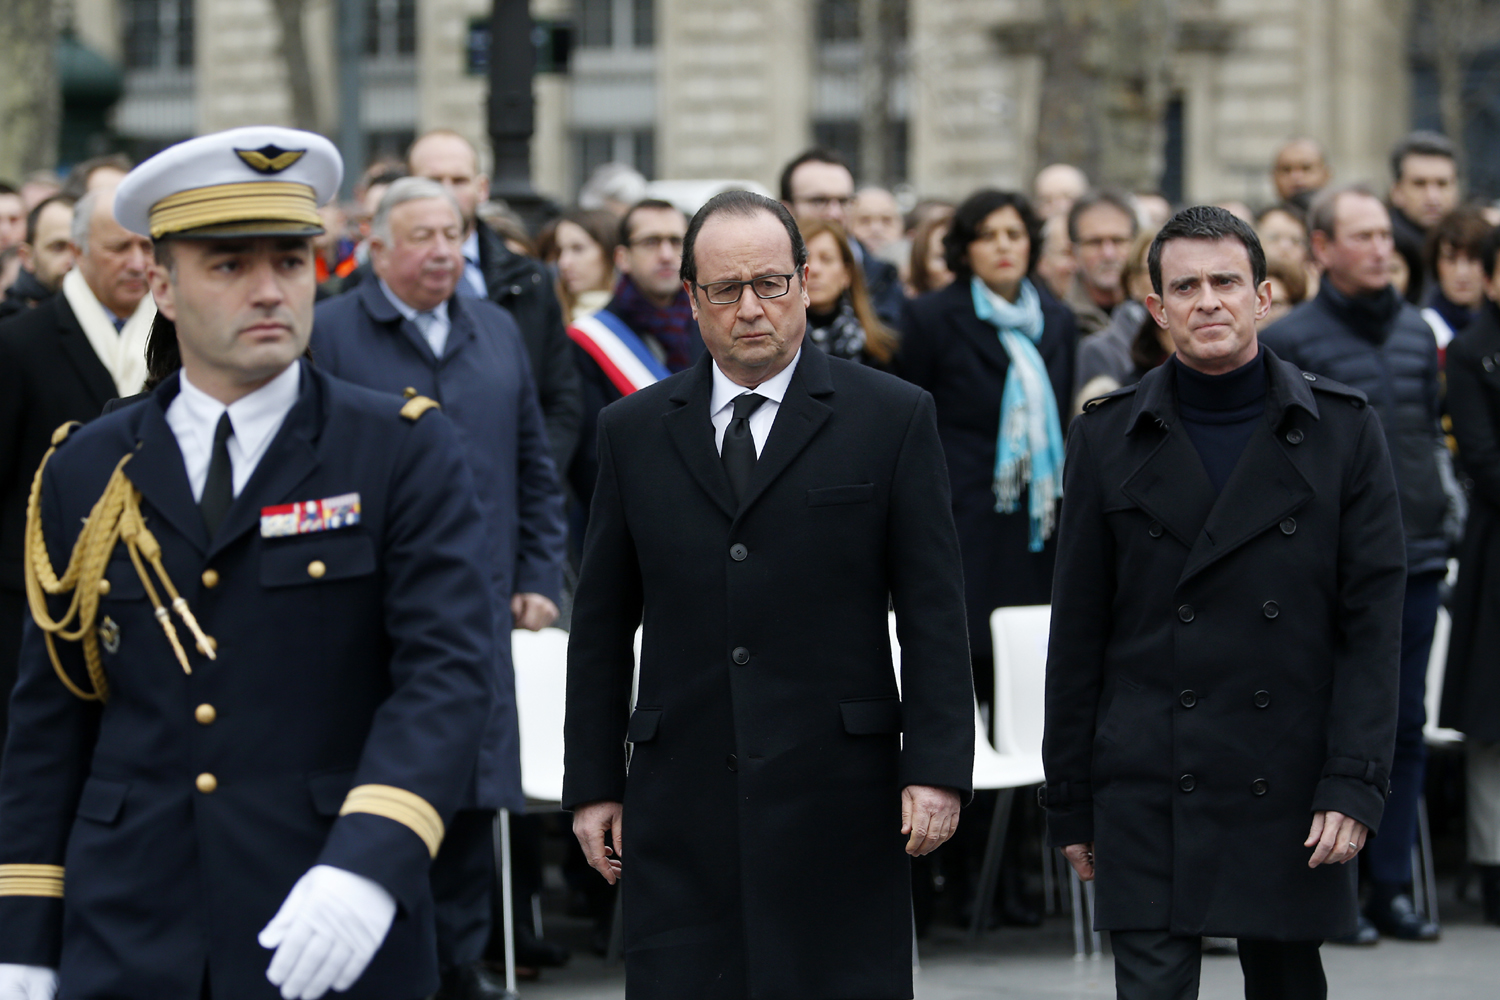 French President Francois Hollande (C) and French Prime Minister Manuel Valls (R) attend a remembrance rally at Place de la Republique (Republic square) on January 10, 2016 to mark a year since 1.6 million people thronged the French capital in a show of unity after attacks on the Charlie Hebdo newspaper and a Jewish supermarket. Just as it was last year, the vast Place de la Republique will be the focus of the gathering as people reiterate their support for freedom of expression and remember the other victims of what would become a year of jihadist outrages in France, culminating in the November 13 coordinated shootings and suicide bombings that killed 130 people and were claimed by the Islamic State (IS) group. / AFP / POOL / YOAN VALAT